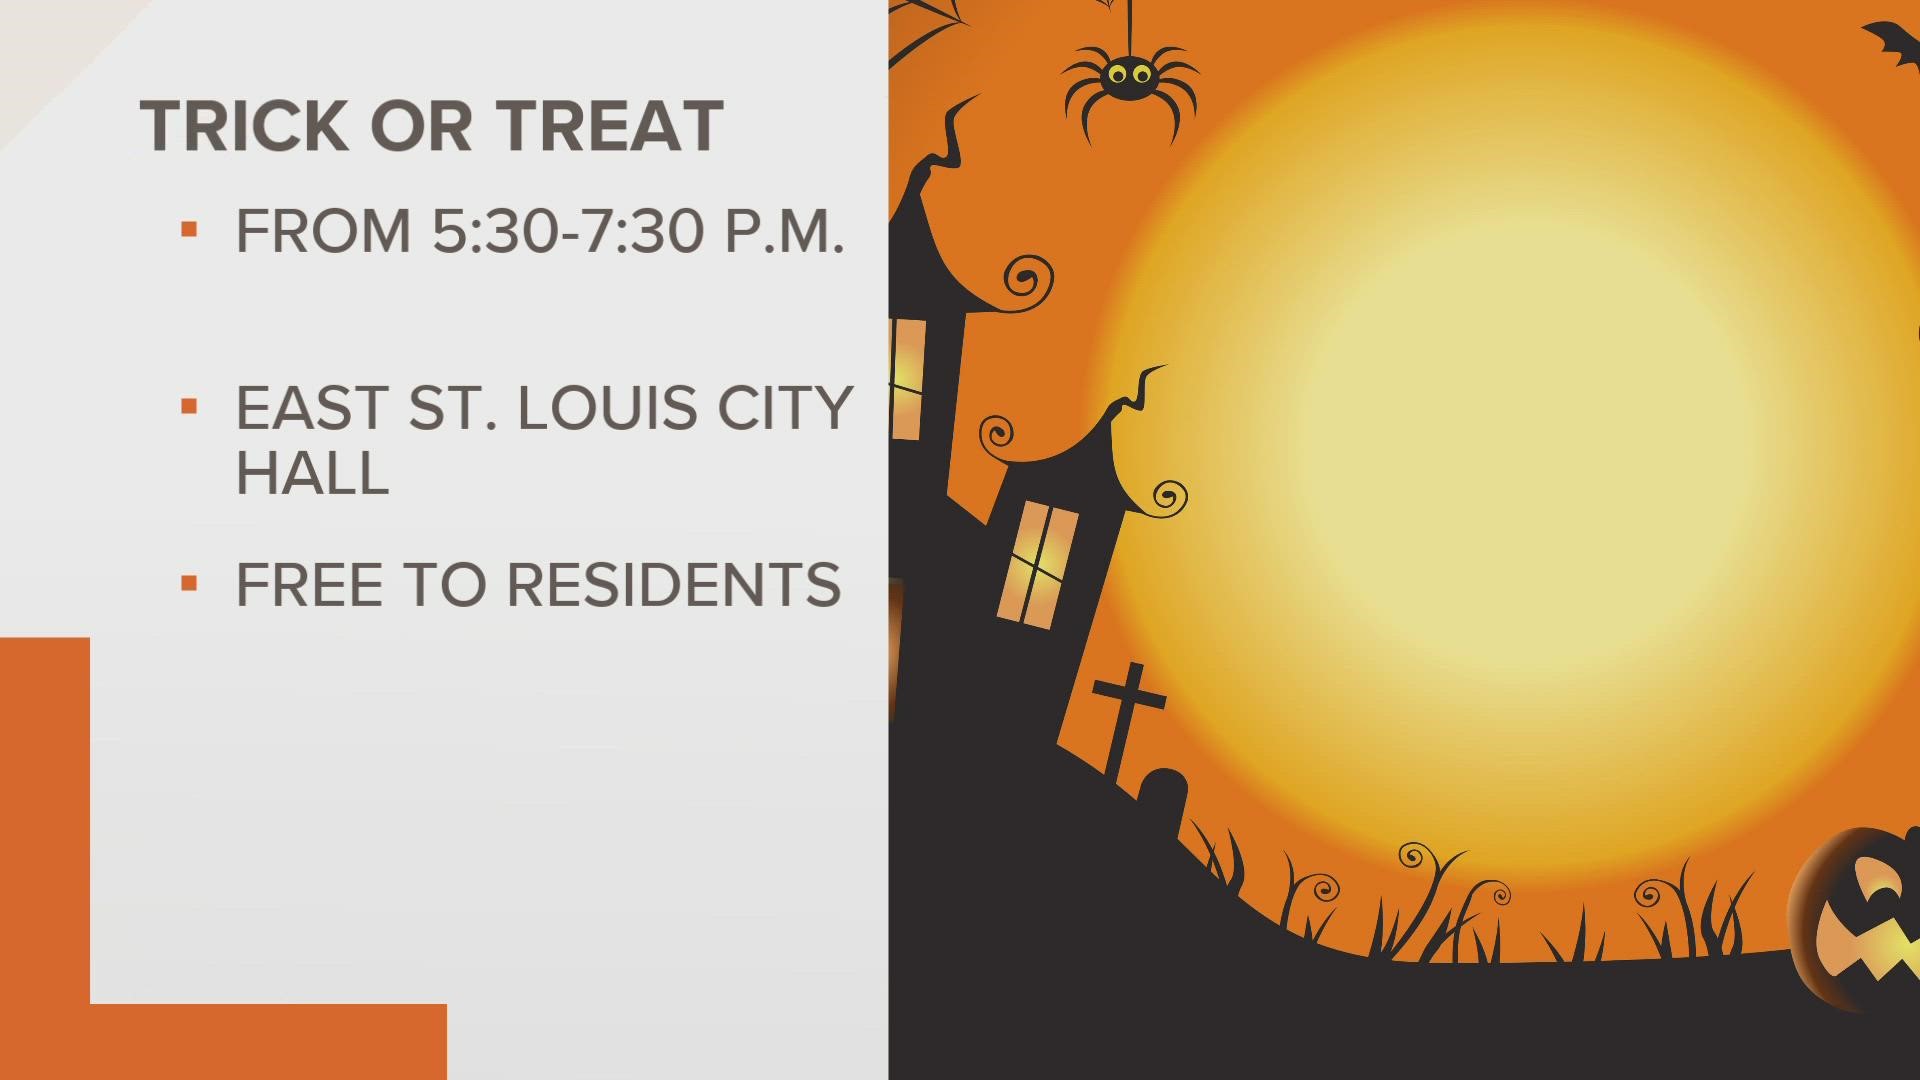 Happy Halloween! East St. Louis is hosting a free event for its residents Monday evening. Enjoy treats, tricks and a walk through the Mayor's haunted house.